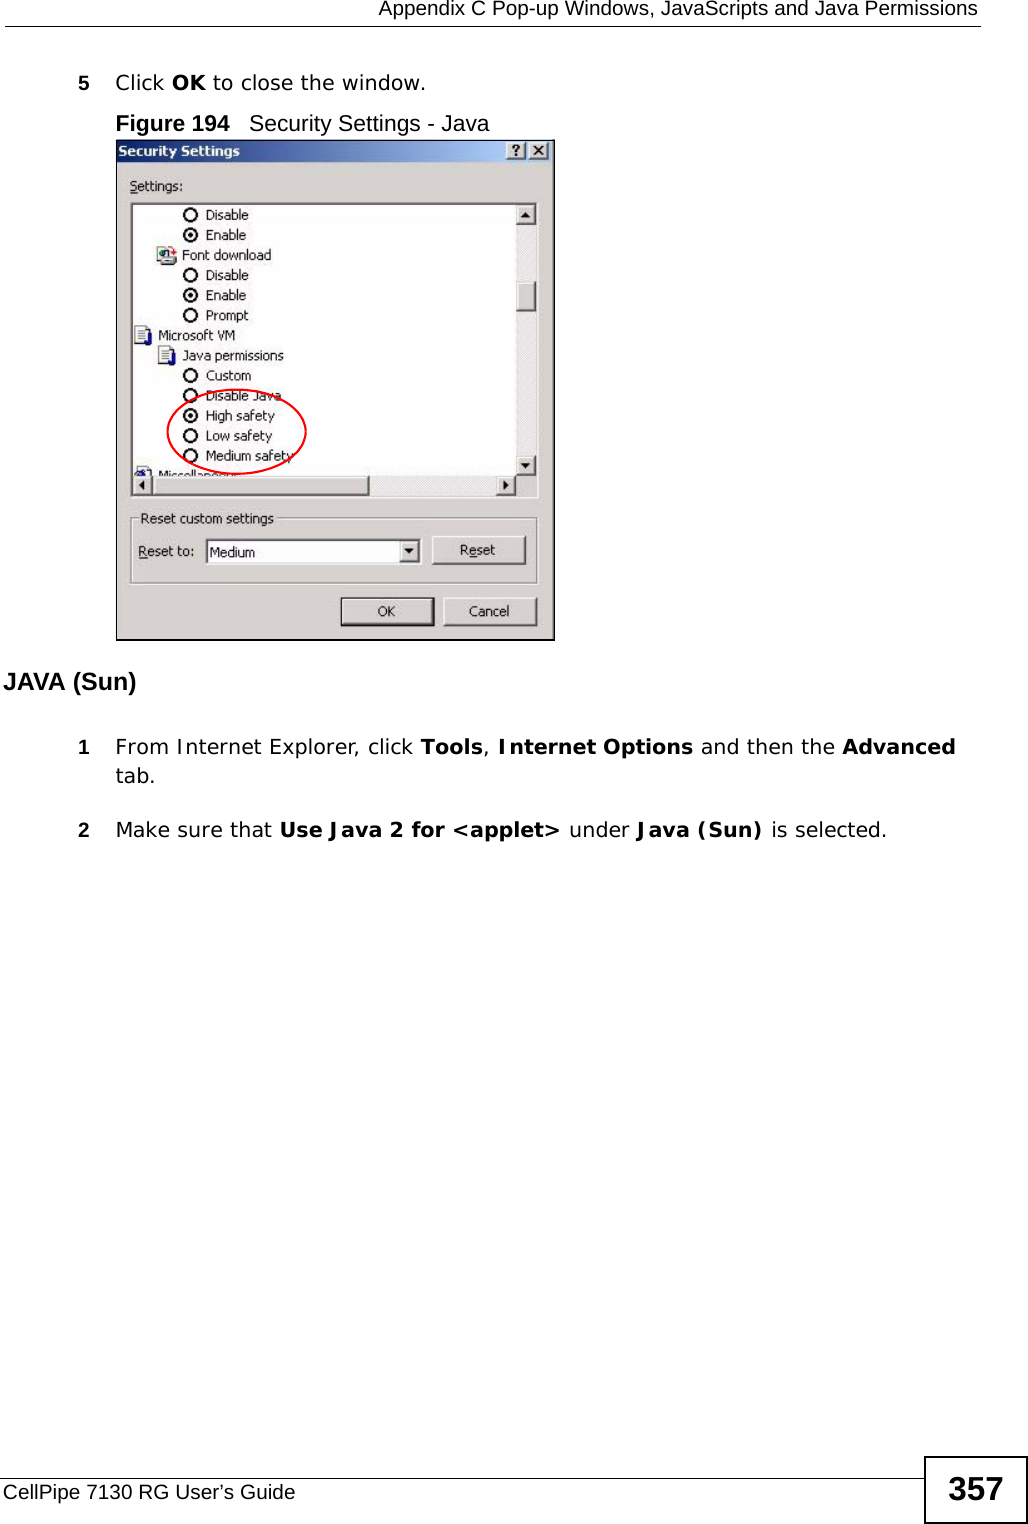  Appendix C Pop-up Windows, JavaScripts and Java PermissionsCellPipe 7130 RG User’s Guide 3575Click OK to close the window.Figure 194   Security Settings - Java JAVA (Sun)1From Internet Explorer, click Tools, Internet Options and then the Advanced tab. 2Make sure that Use Java 2 for &lt;applet&gt; under Java (Sun) is selected.